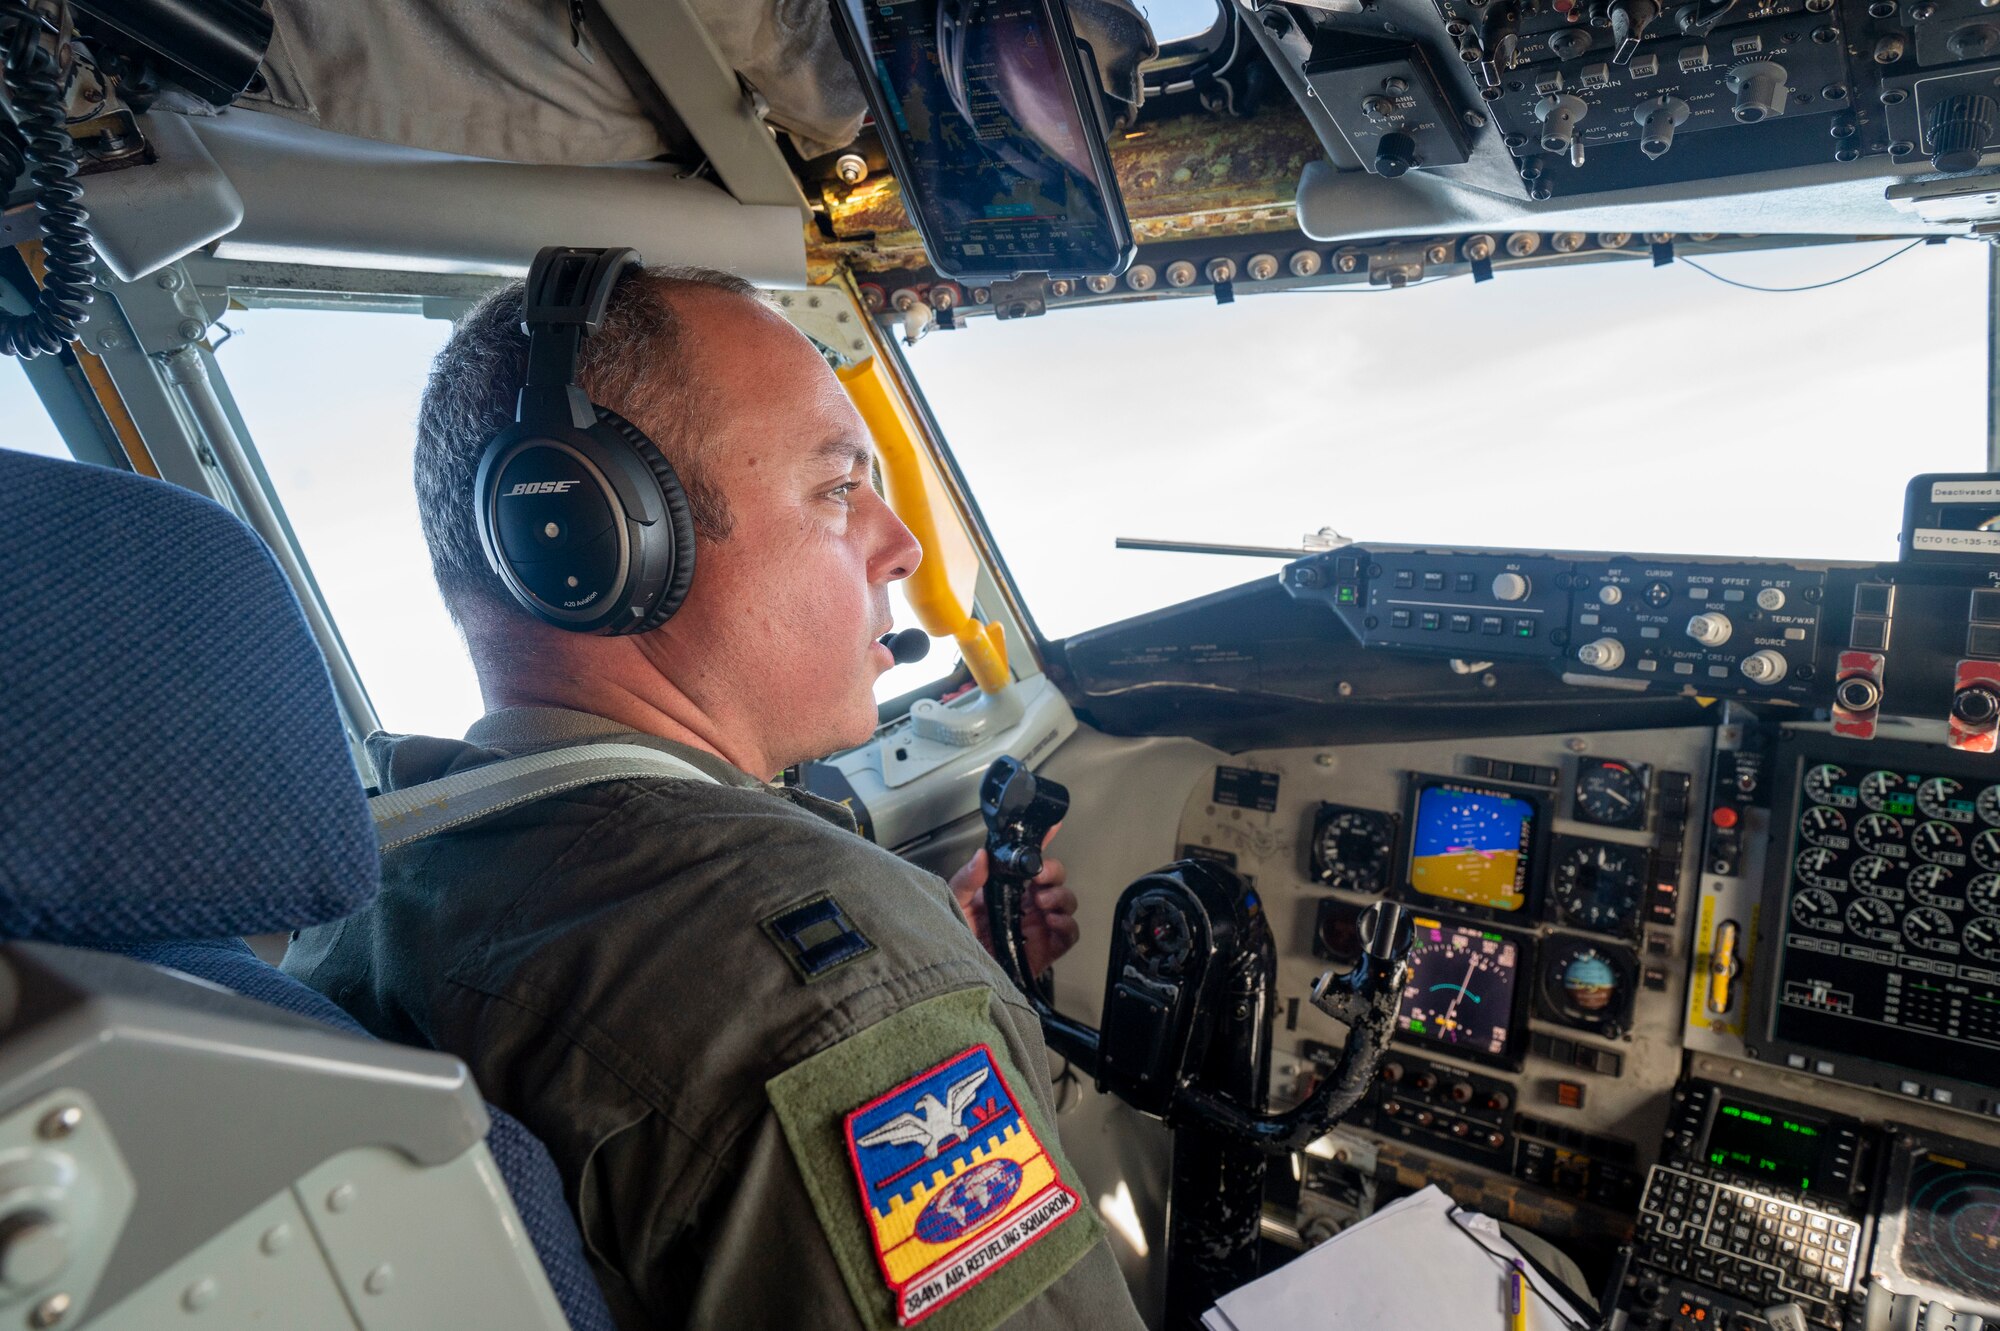 U.S. Air Force Capt. Philip Campbell, 384th Aerial Refueling Squadron KC-135 Stratotanker pilot, operates a KC-135, assigned to the 92nd Aerial Refueling Wing, during Mobility Guardian 23 over the Indo-Pacific region July 14, 2023. 3,000 personnel directly supported the large-scale mobility exercise, which provided the maneuver of more than 15,000 U.S. and international forces associated with other exercises across the Indo-Pacific held in the same timeframe. (U.S. Air Force photo by Tech. Sgt. Heather Clements)